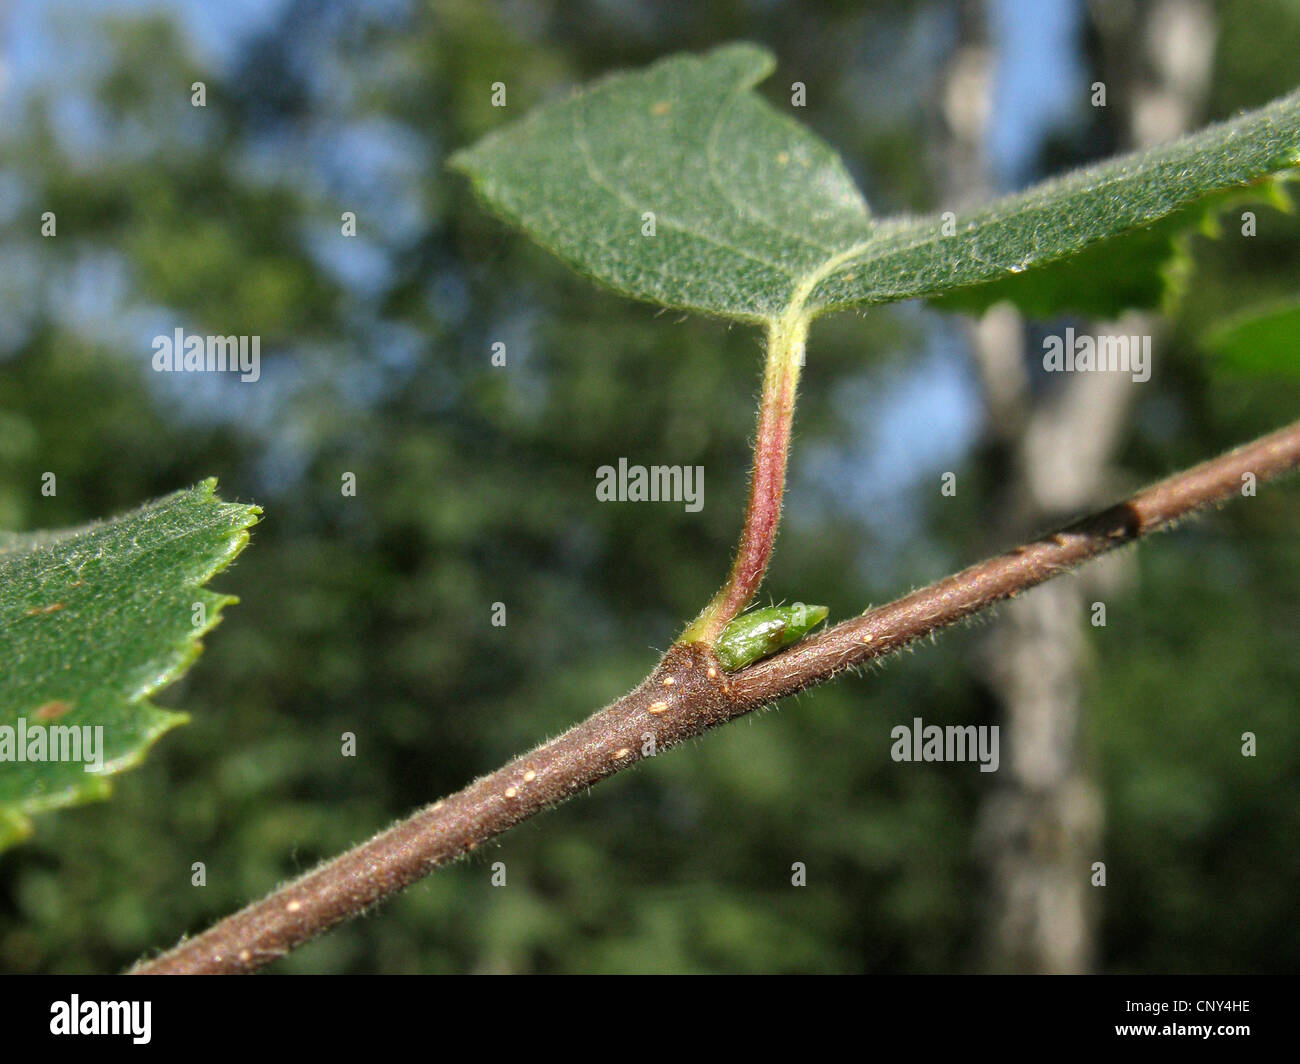 downy birch (Betula pubescens), branch with leaves and hairy bud, Germany, Lower Saxony Stock Photo